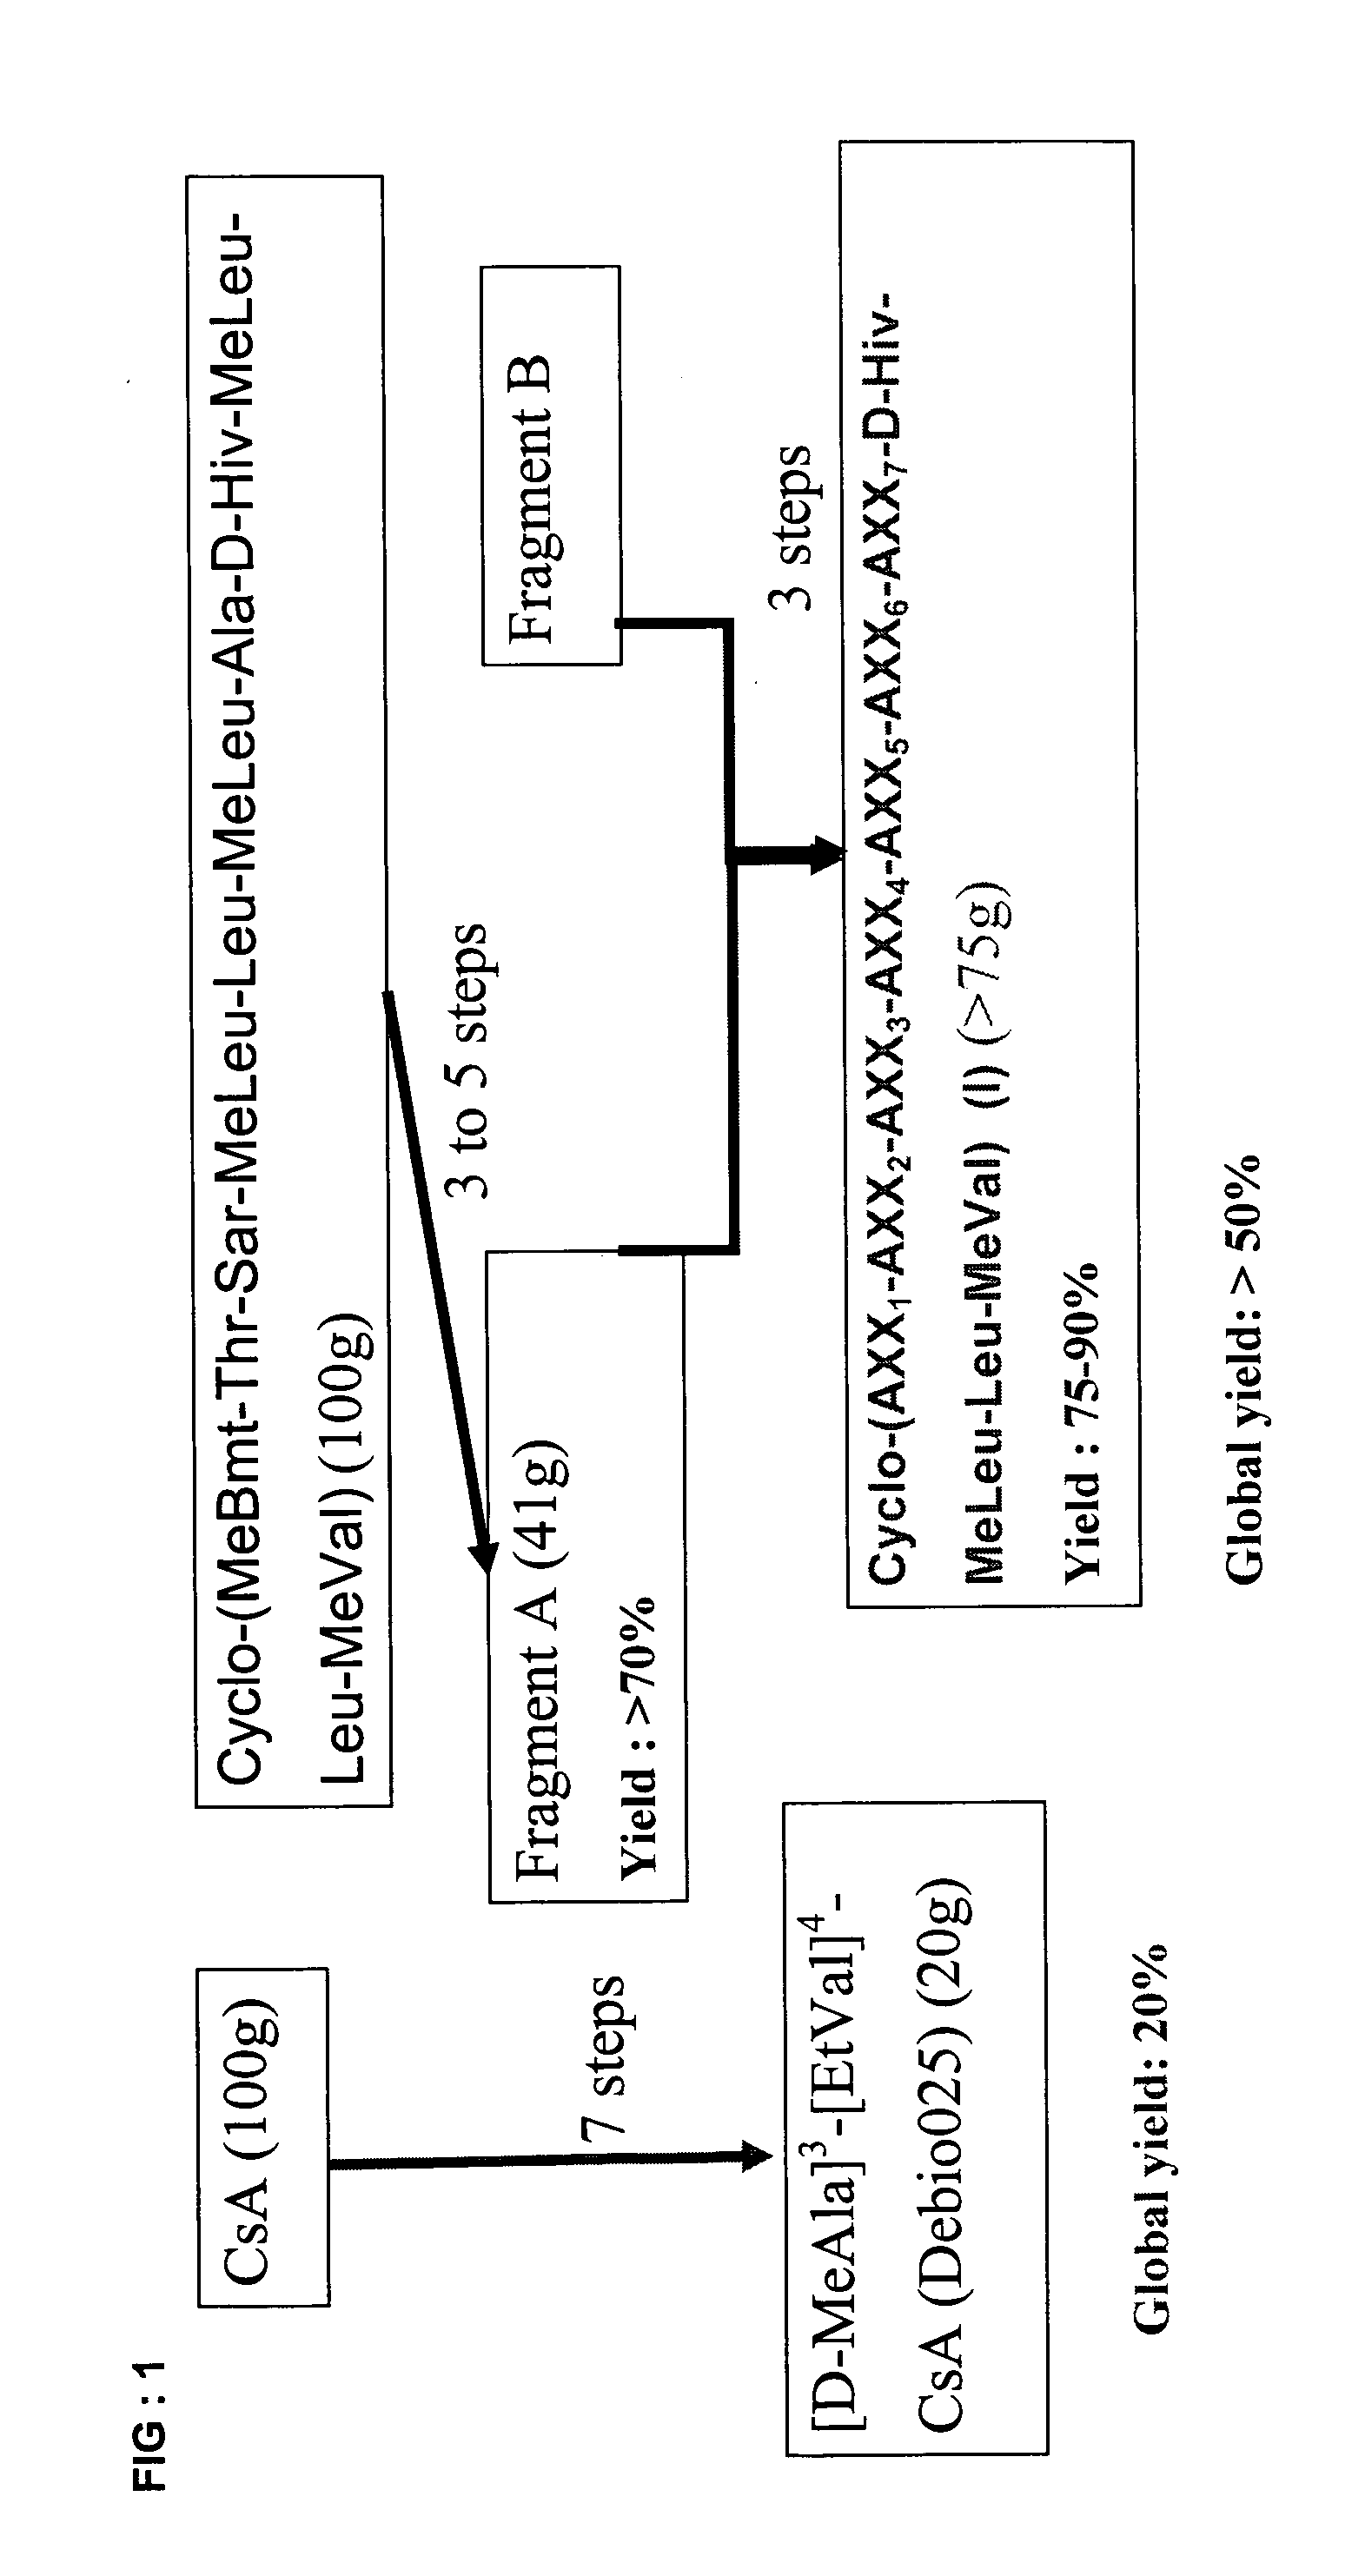 Cycloundecadepsipeptide compounds and use of said compounds as a medicament